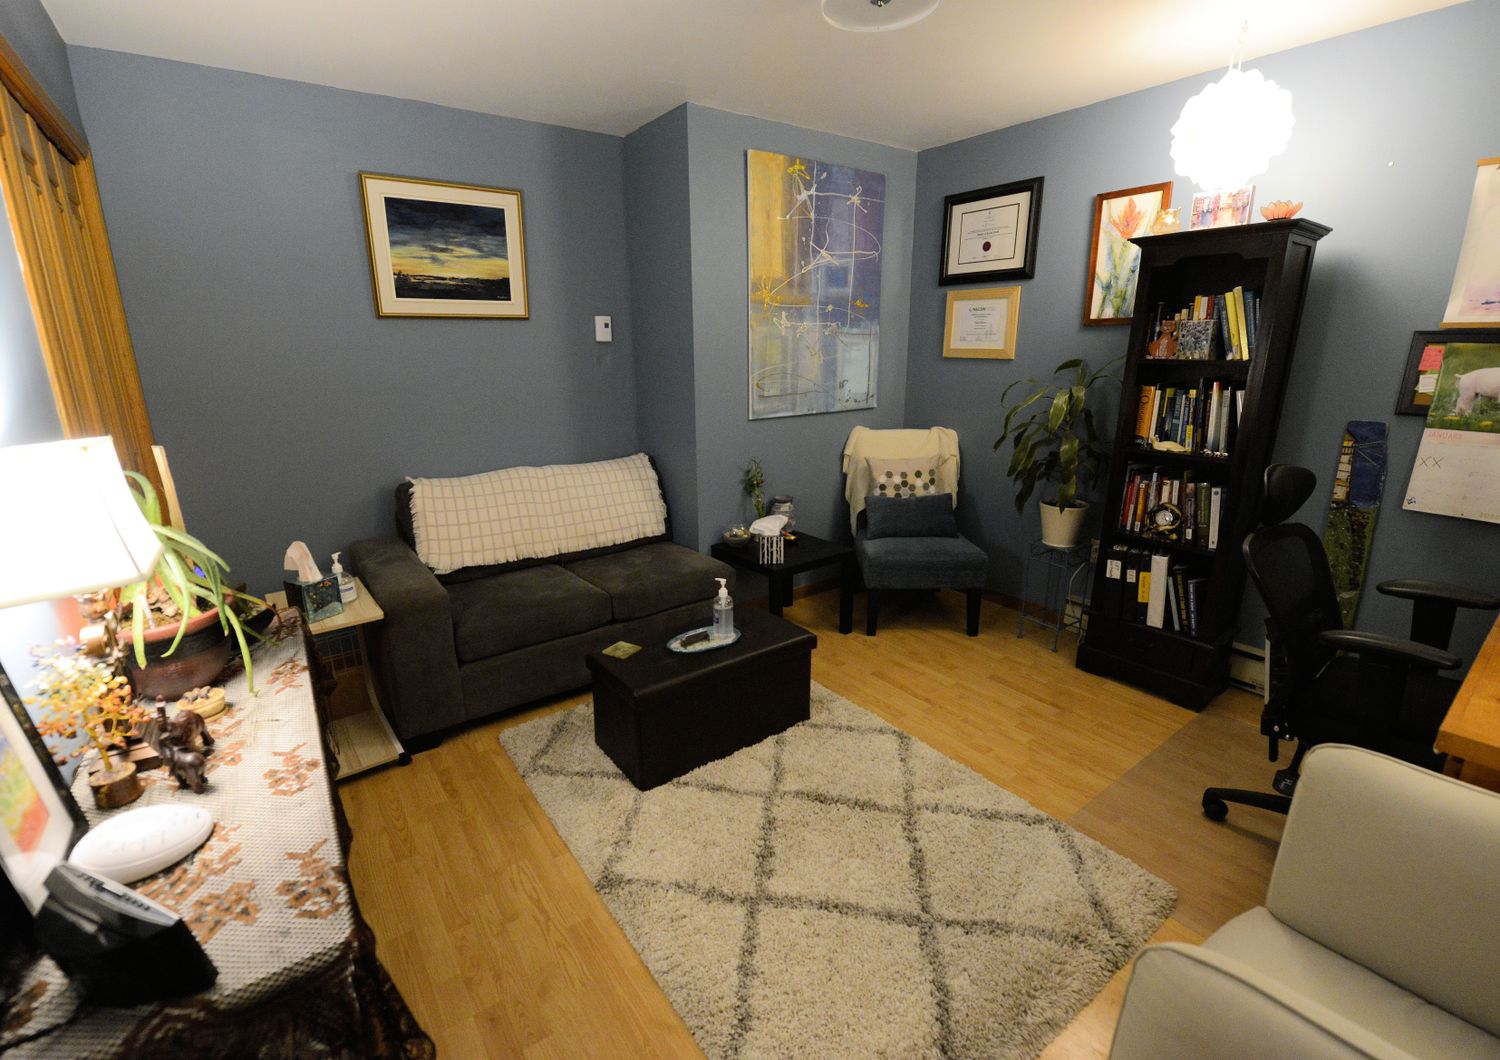 Gallery Photo of Kelly Breau Counselling therapy room.